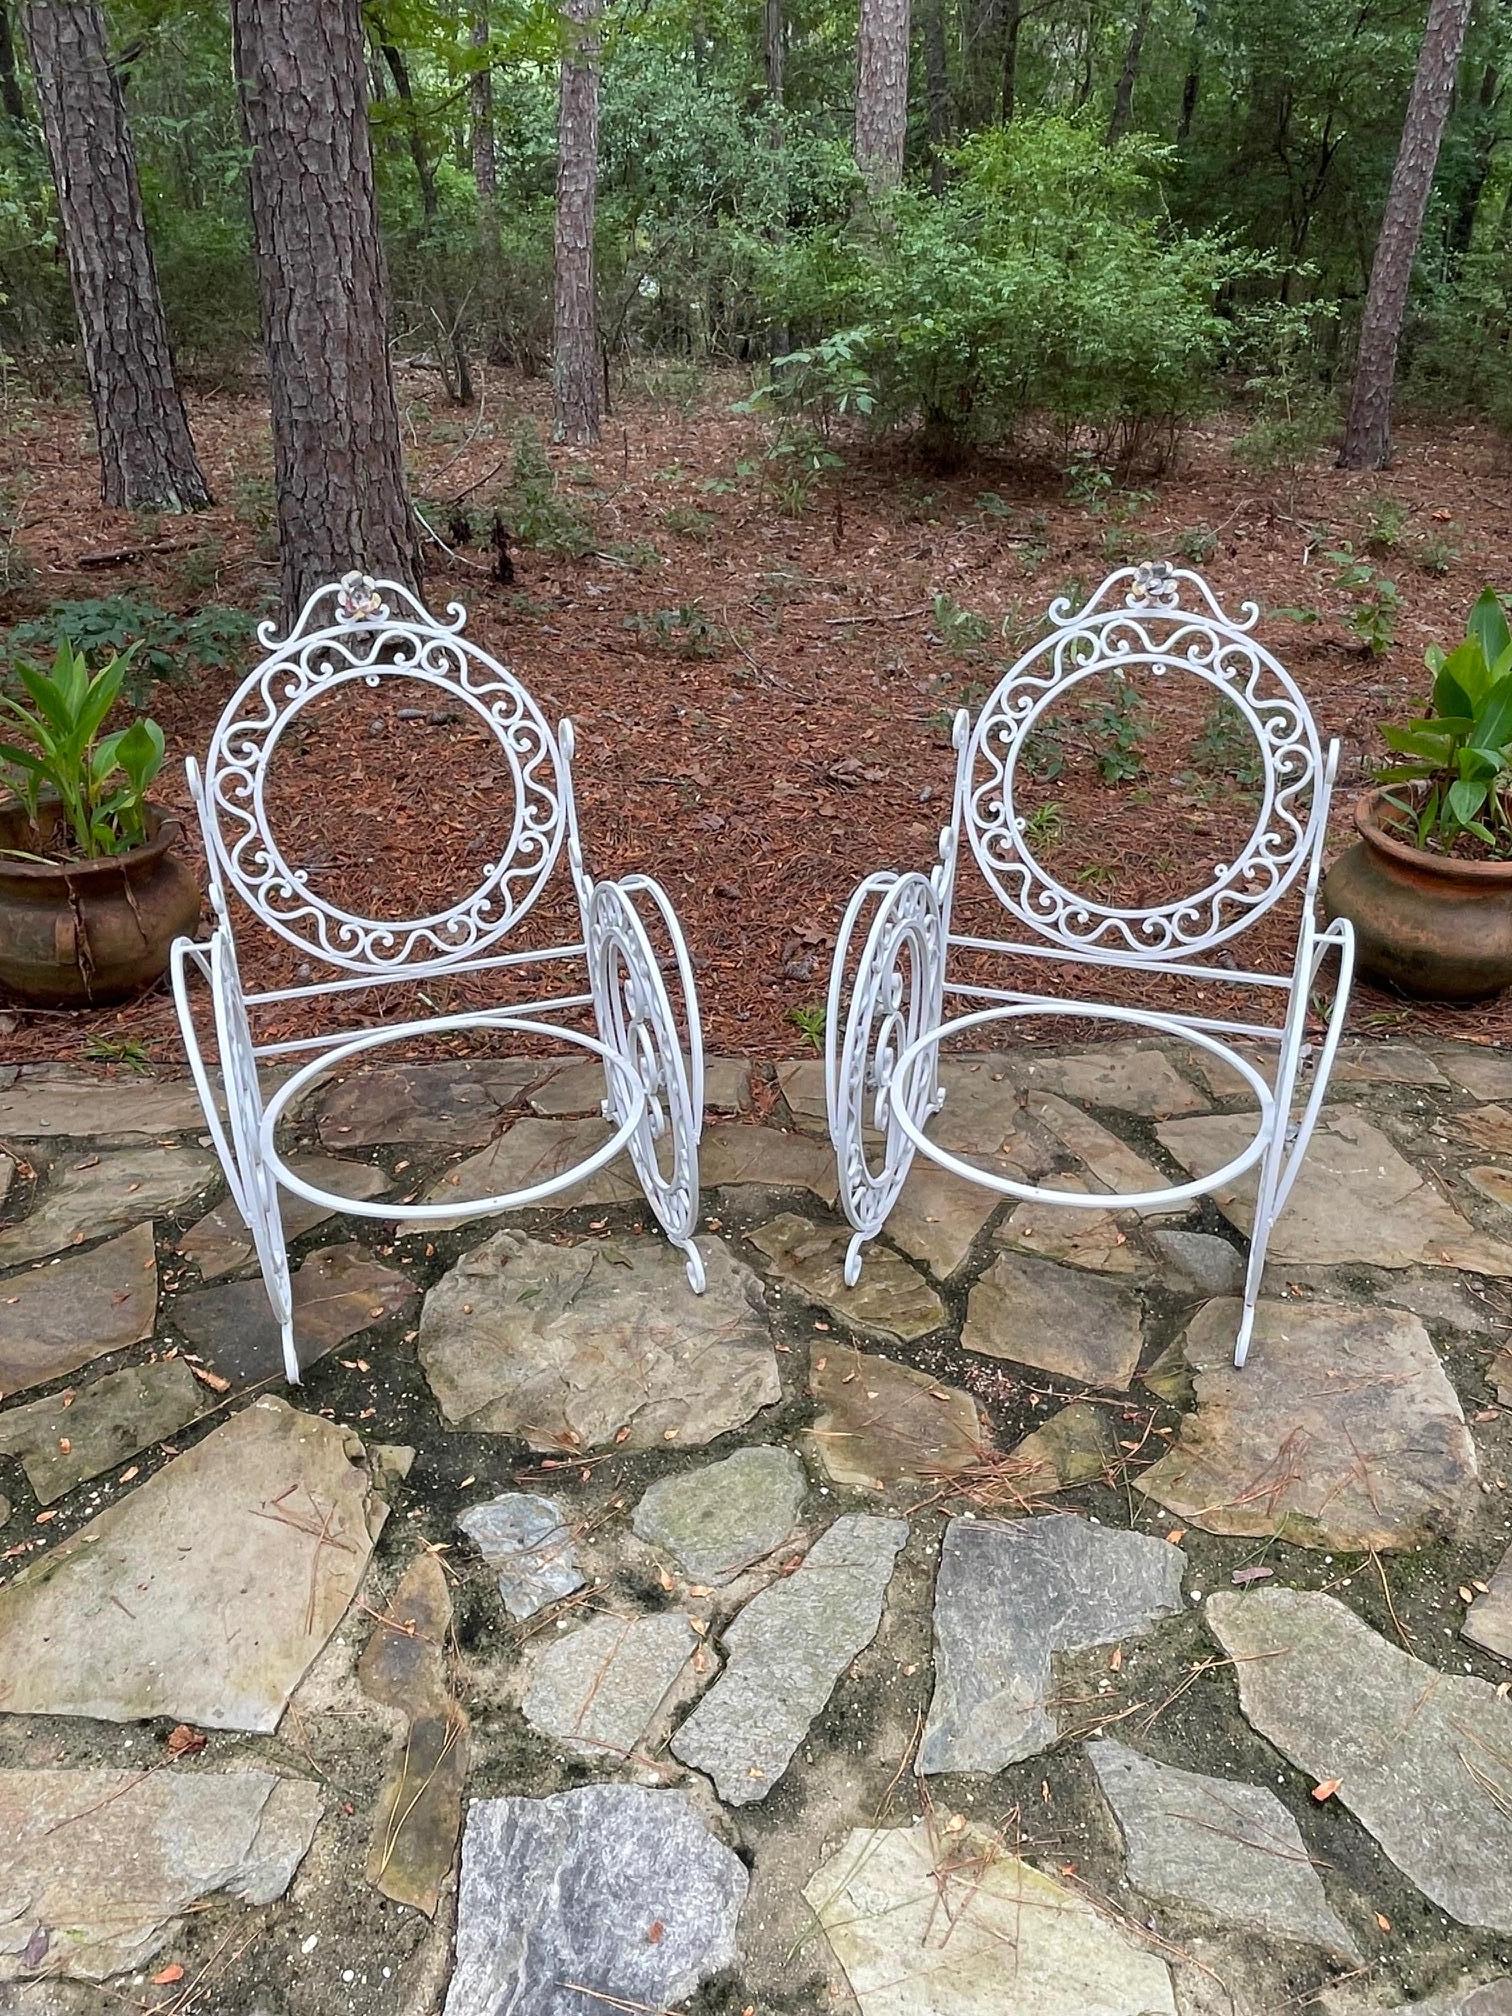 A quite exceptional late 19th century pair of French patio/orangery chairs.

This is a beautiful pair of large wrought iron chairs, with the most intricate decorative detailing and workmanship throughout. Exquisite flowers and leaves decorate the